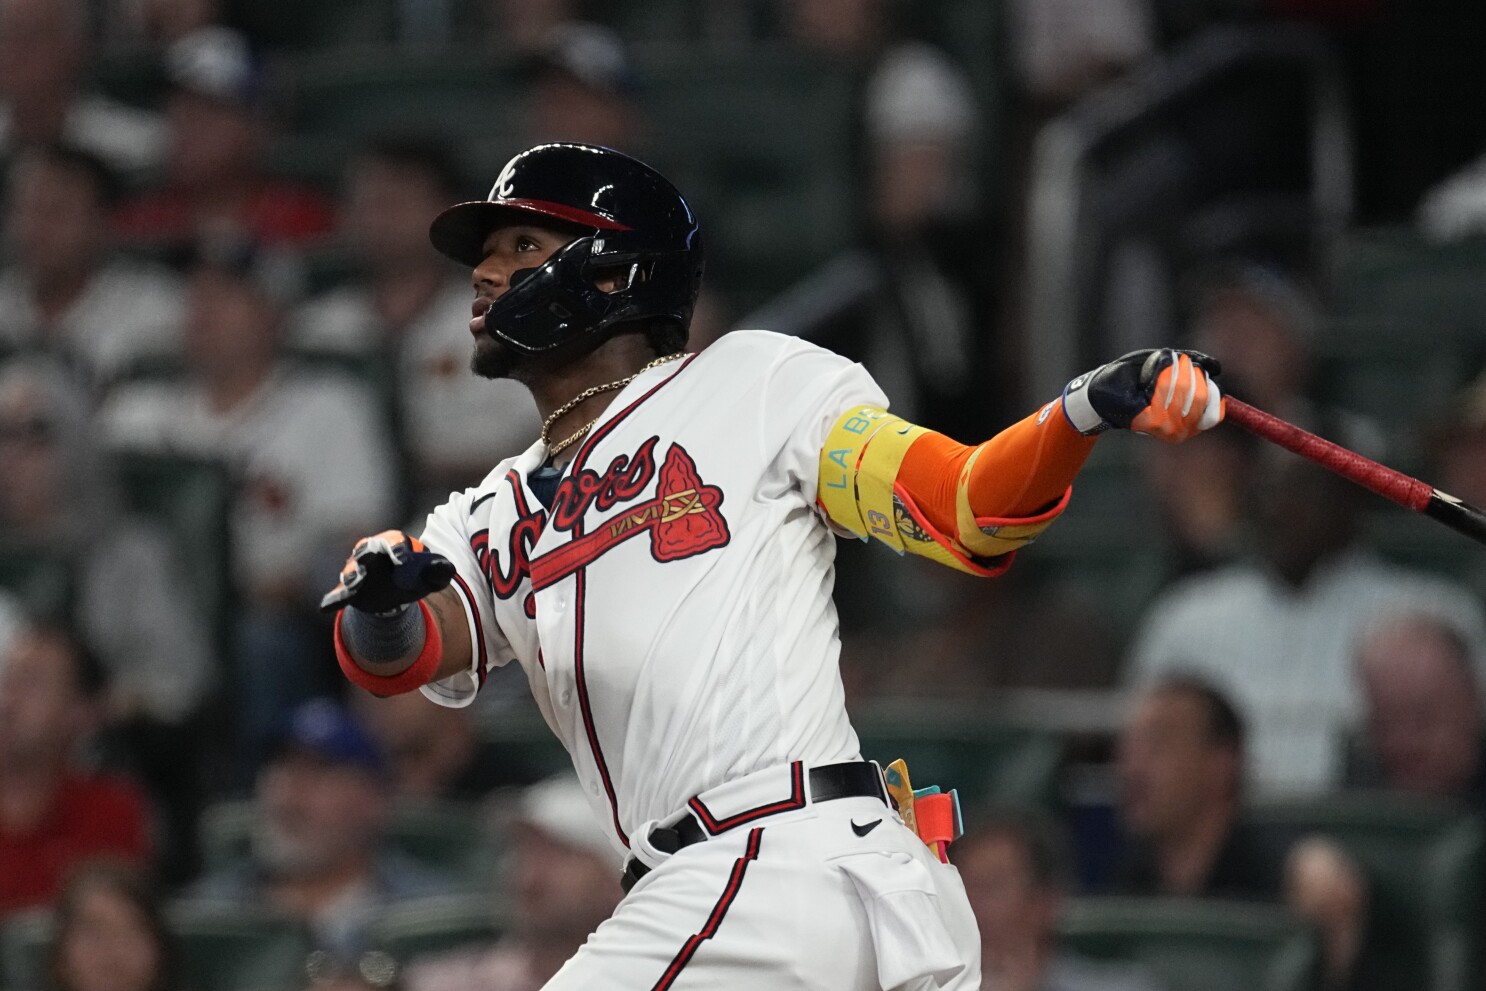 Braves hit 4 homers in 11-7 win to take series from Twins - The Sumter Item